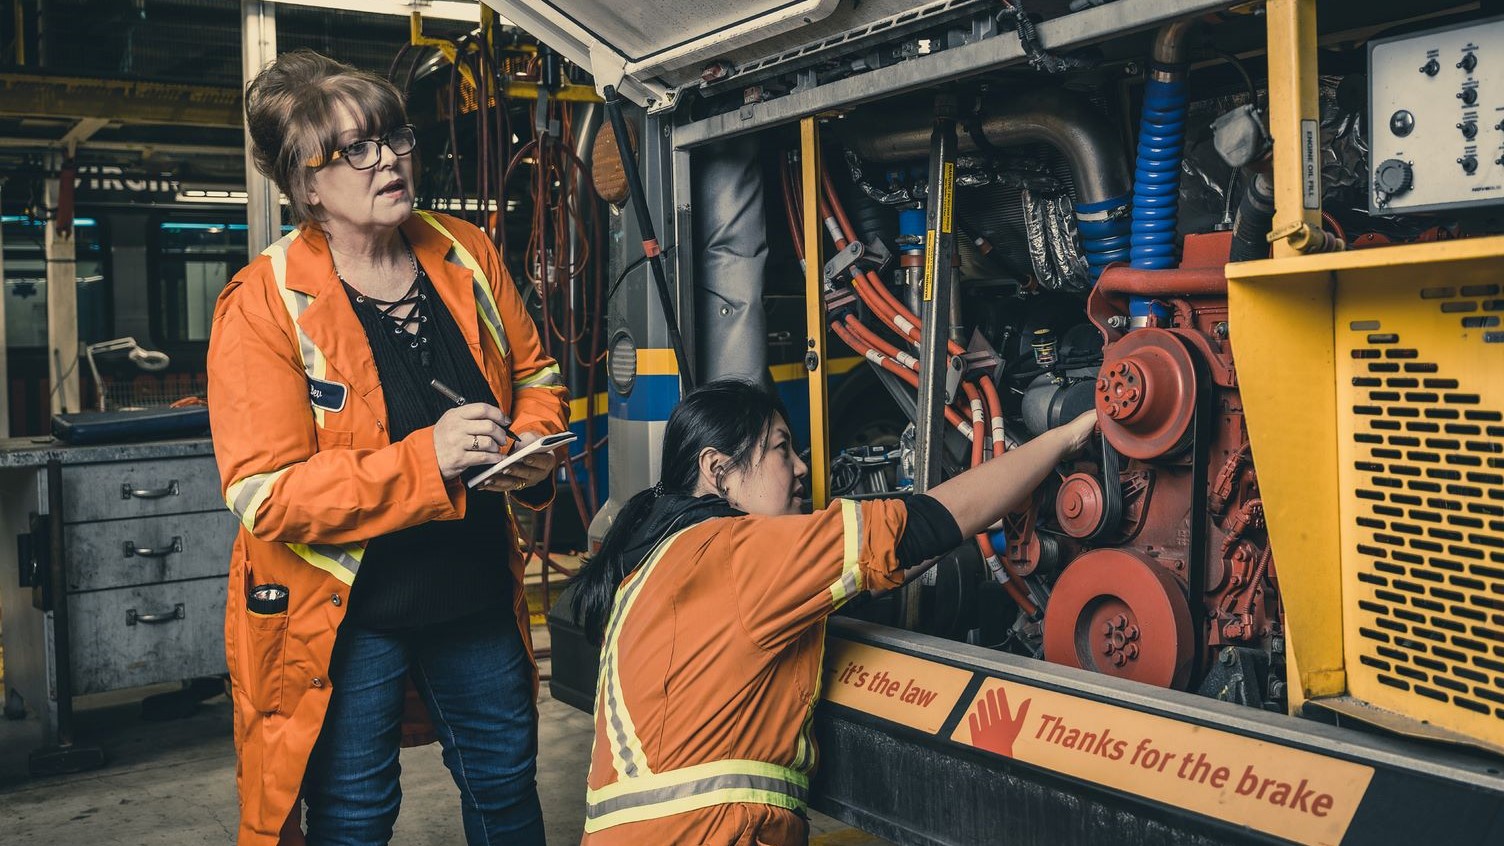 A mechanic inspects the engine of a bus while another takes notes